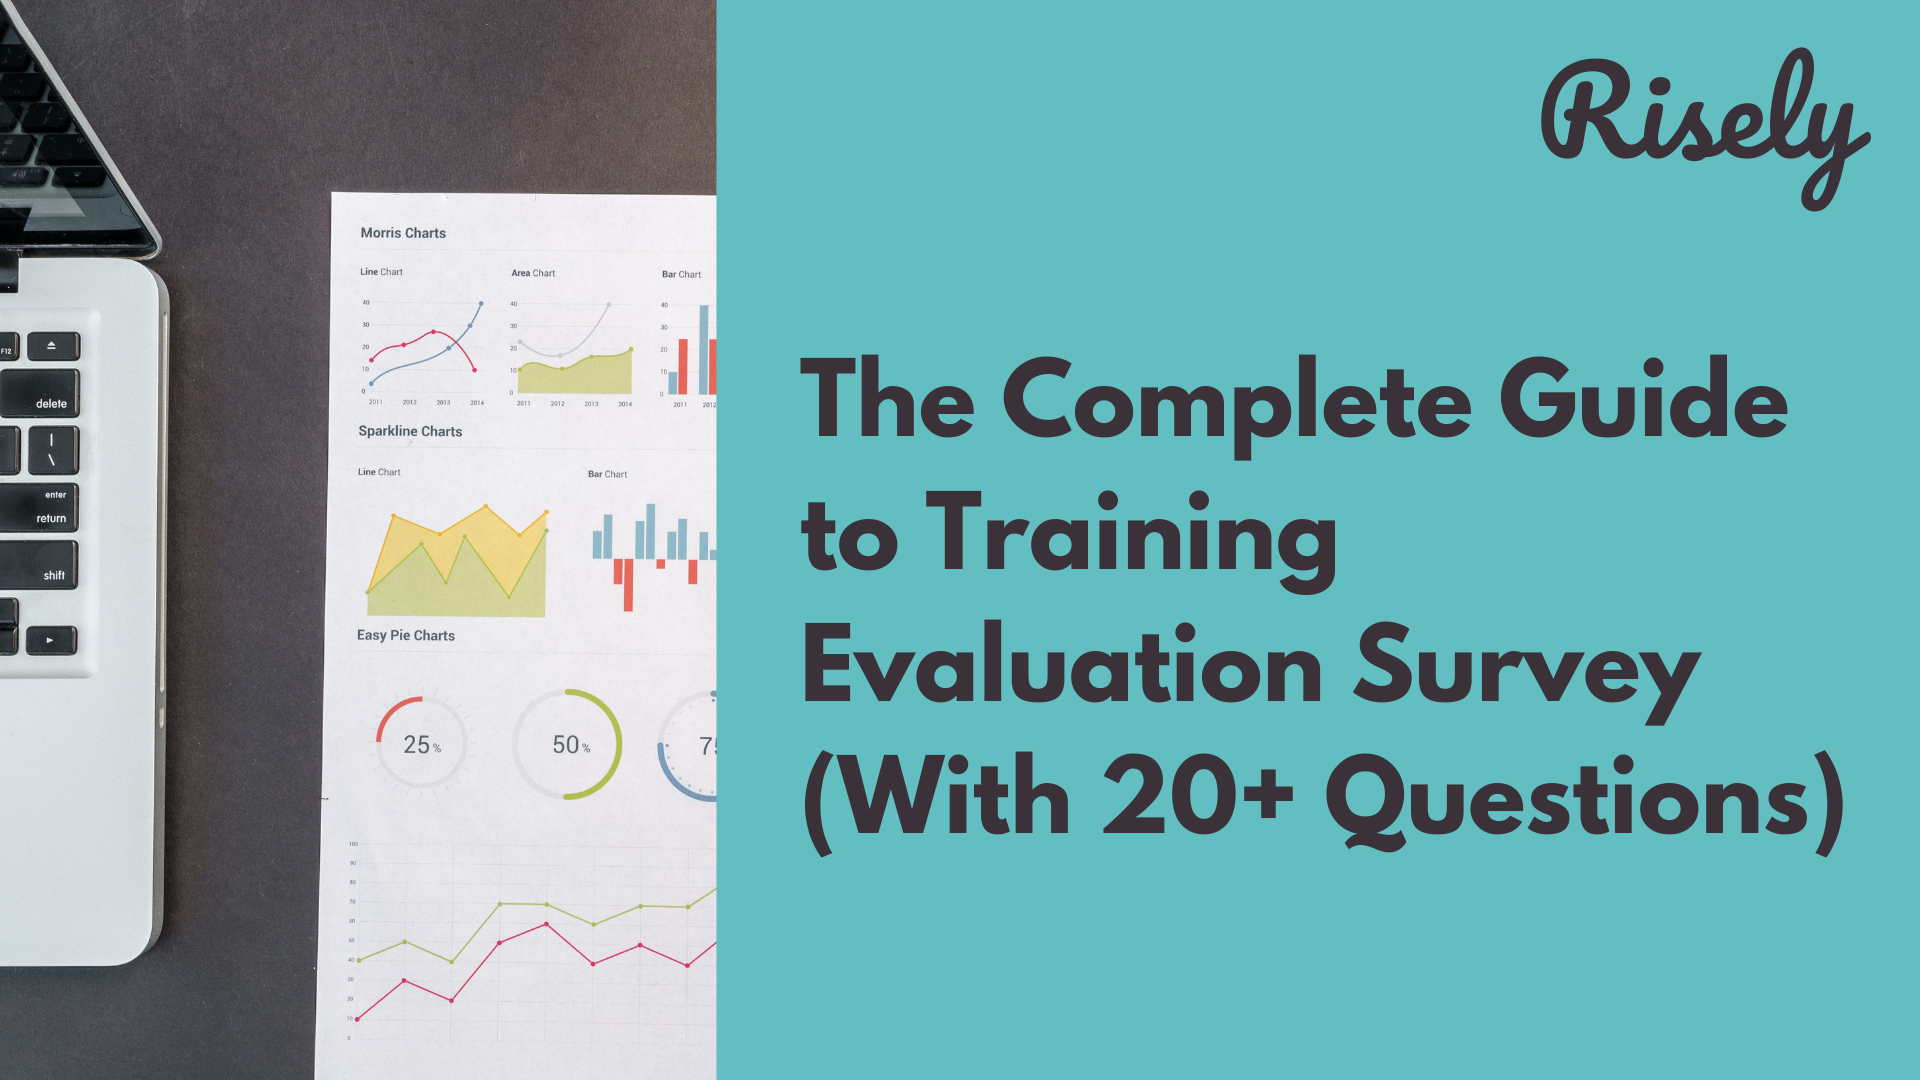 The Complete Guide to Training Evaluation Survey (With 20+ Questions)